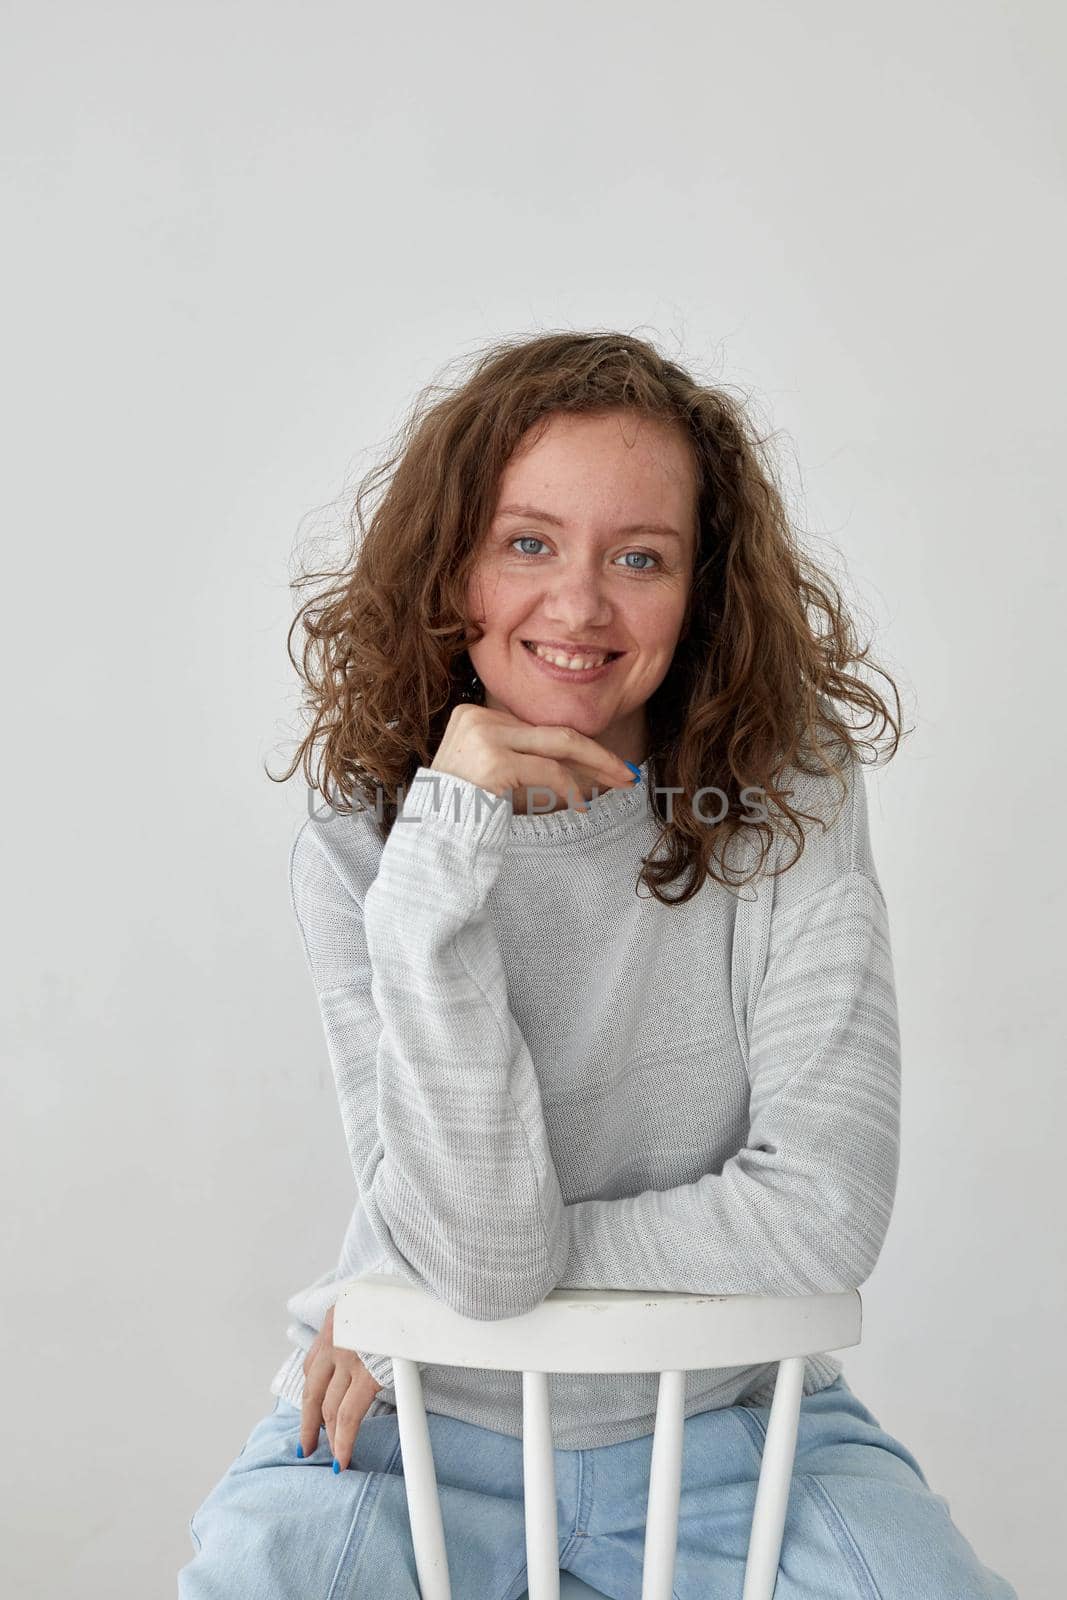 Charming young female with wavy hair dressed in casual gray sweater and jeans sitting on chair and looking at camera with smile against white background